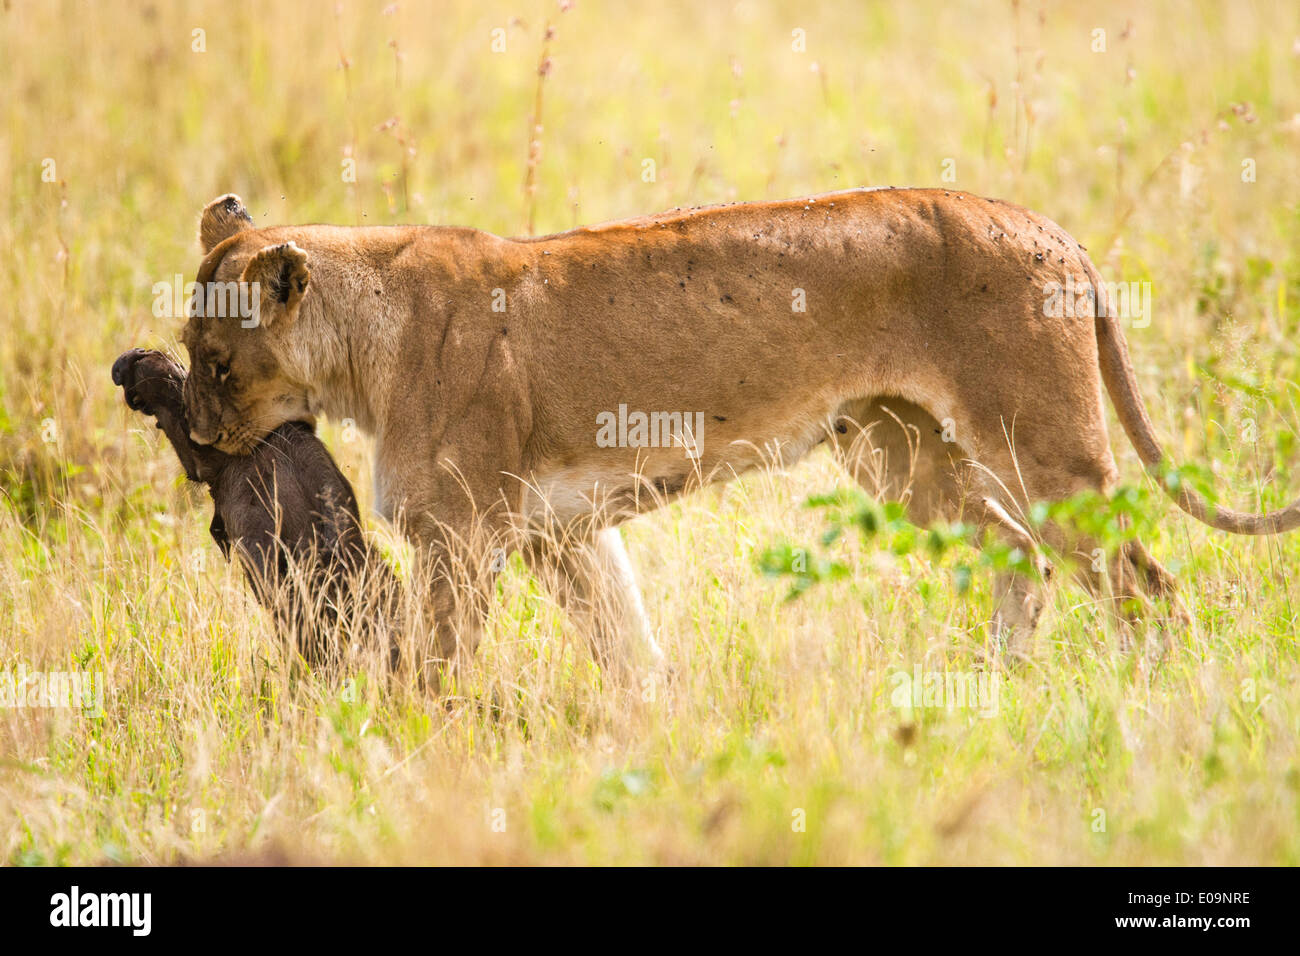 Lioness (Panthera leo) with prey. Photographed in Tanzania Stock Photo